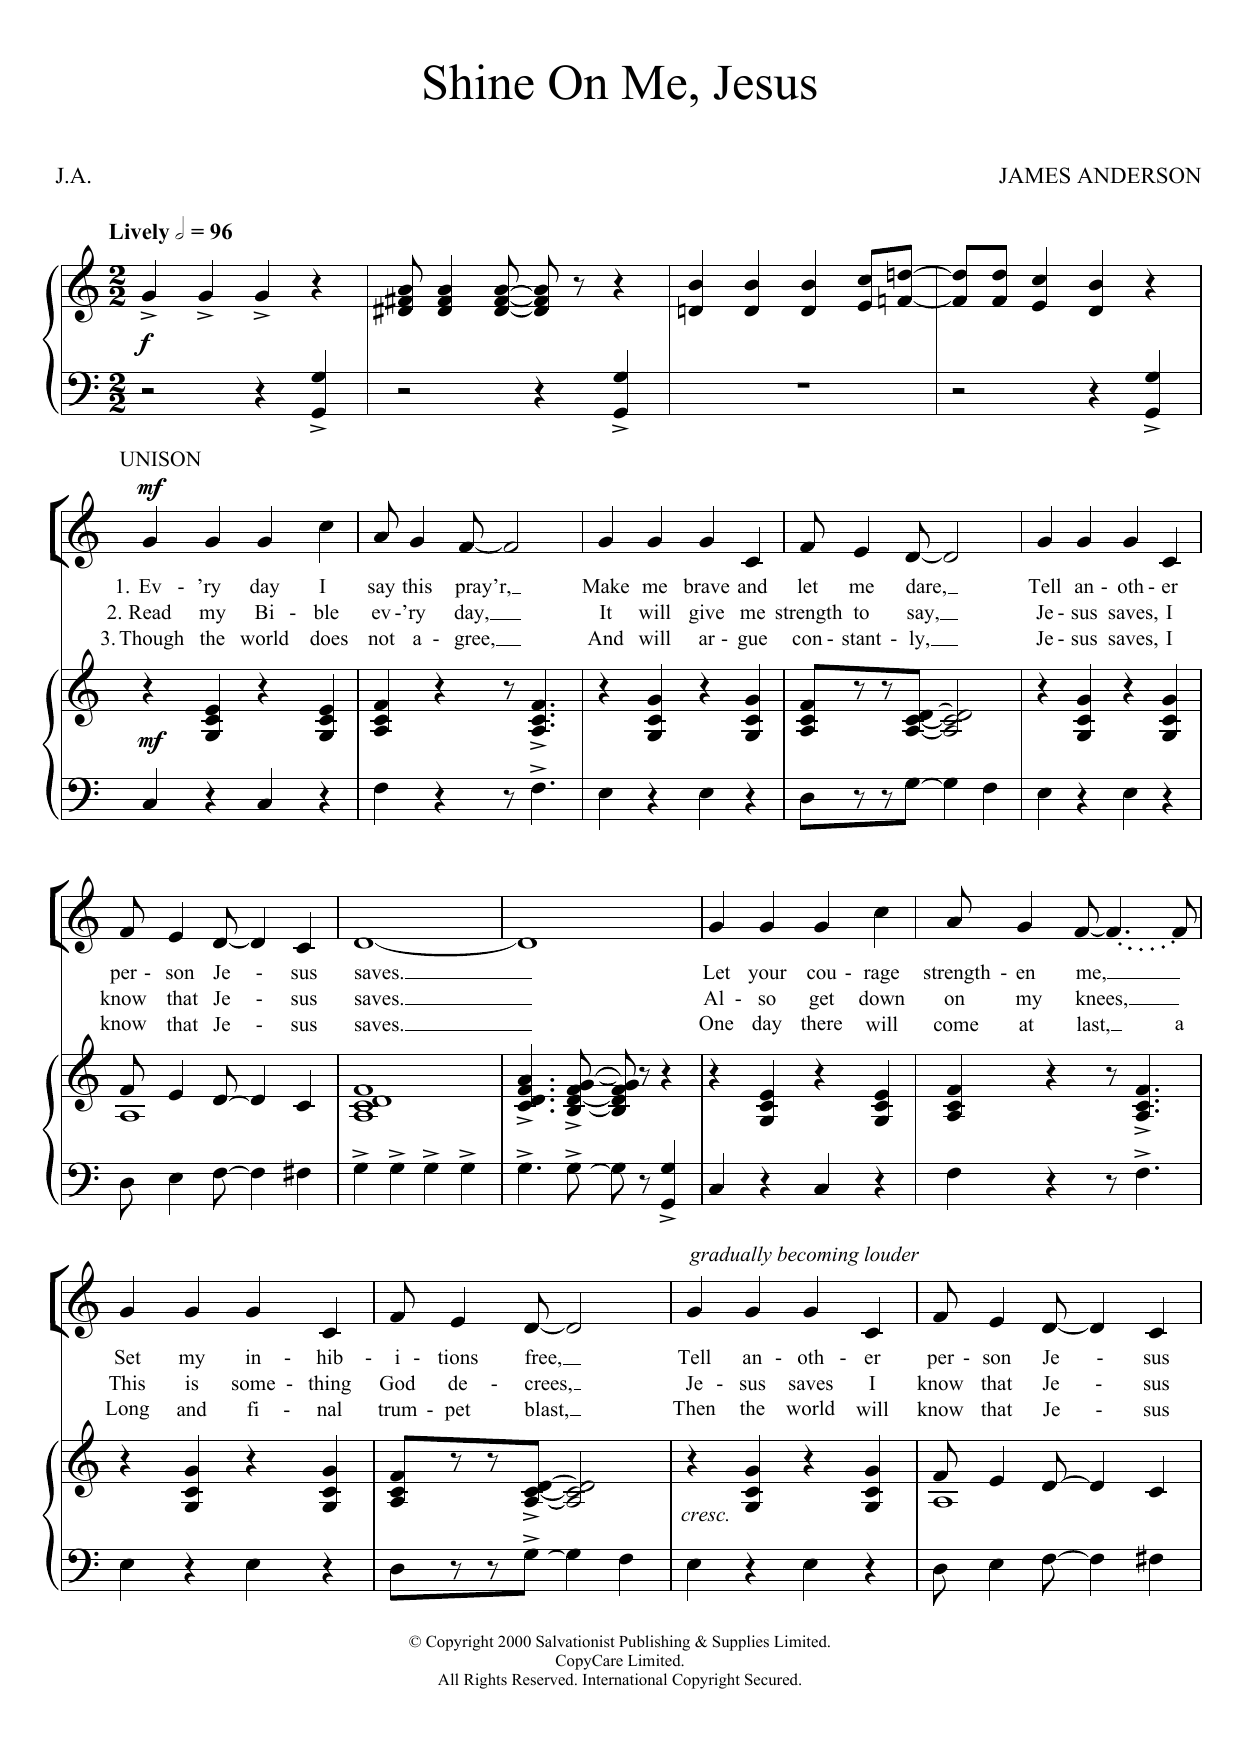 Download The Salvation Army Shine On Me, Jesus Sheet Music